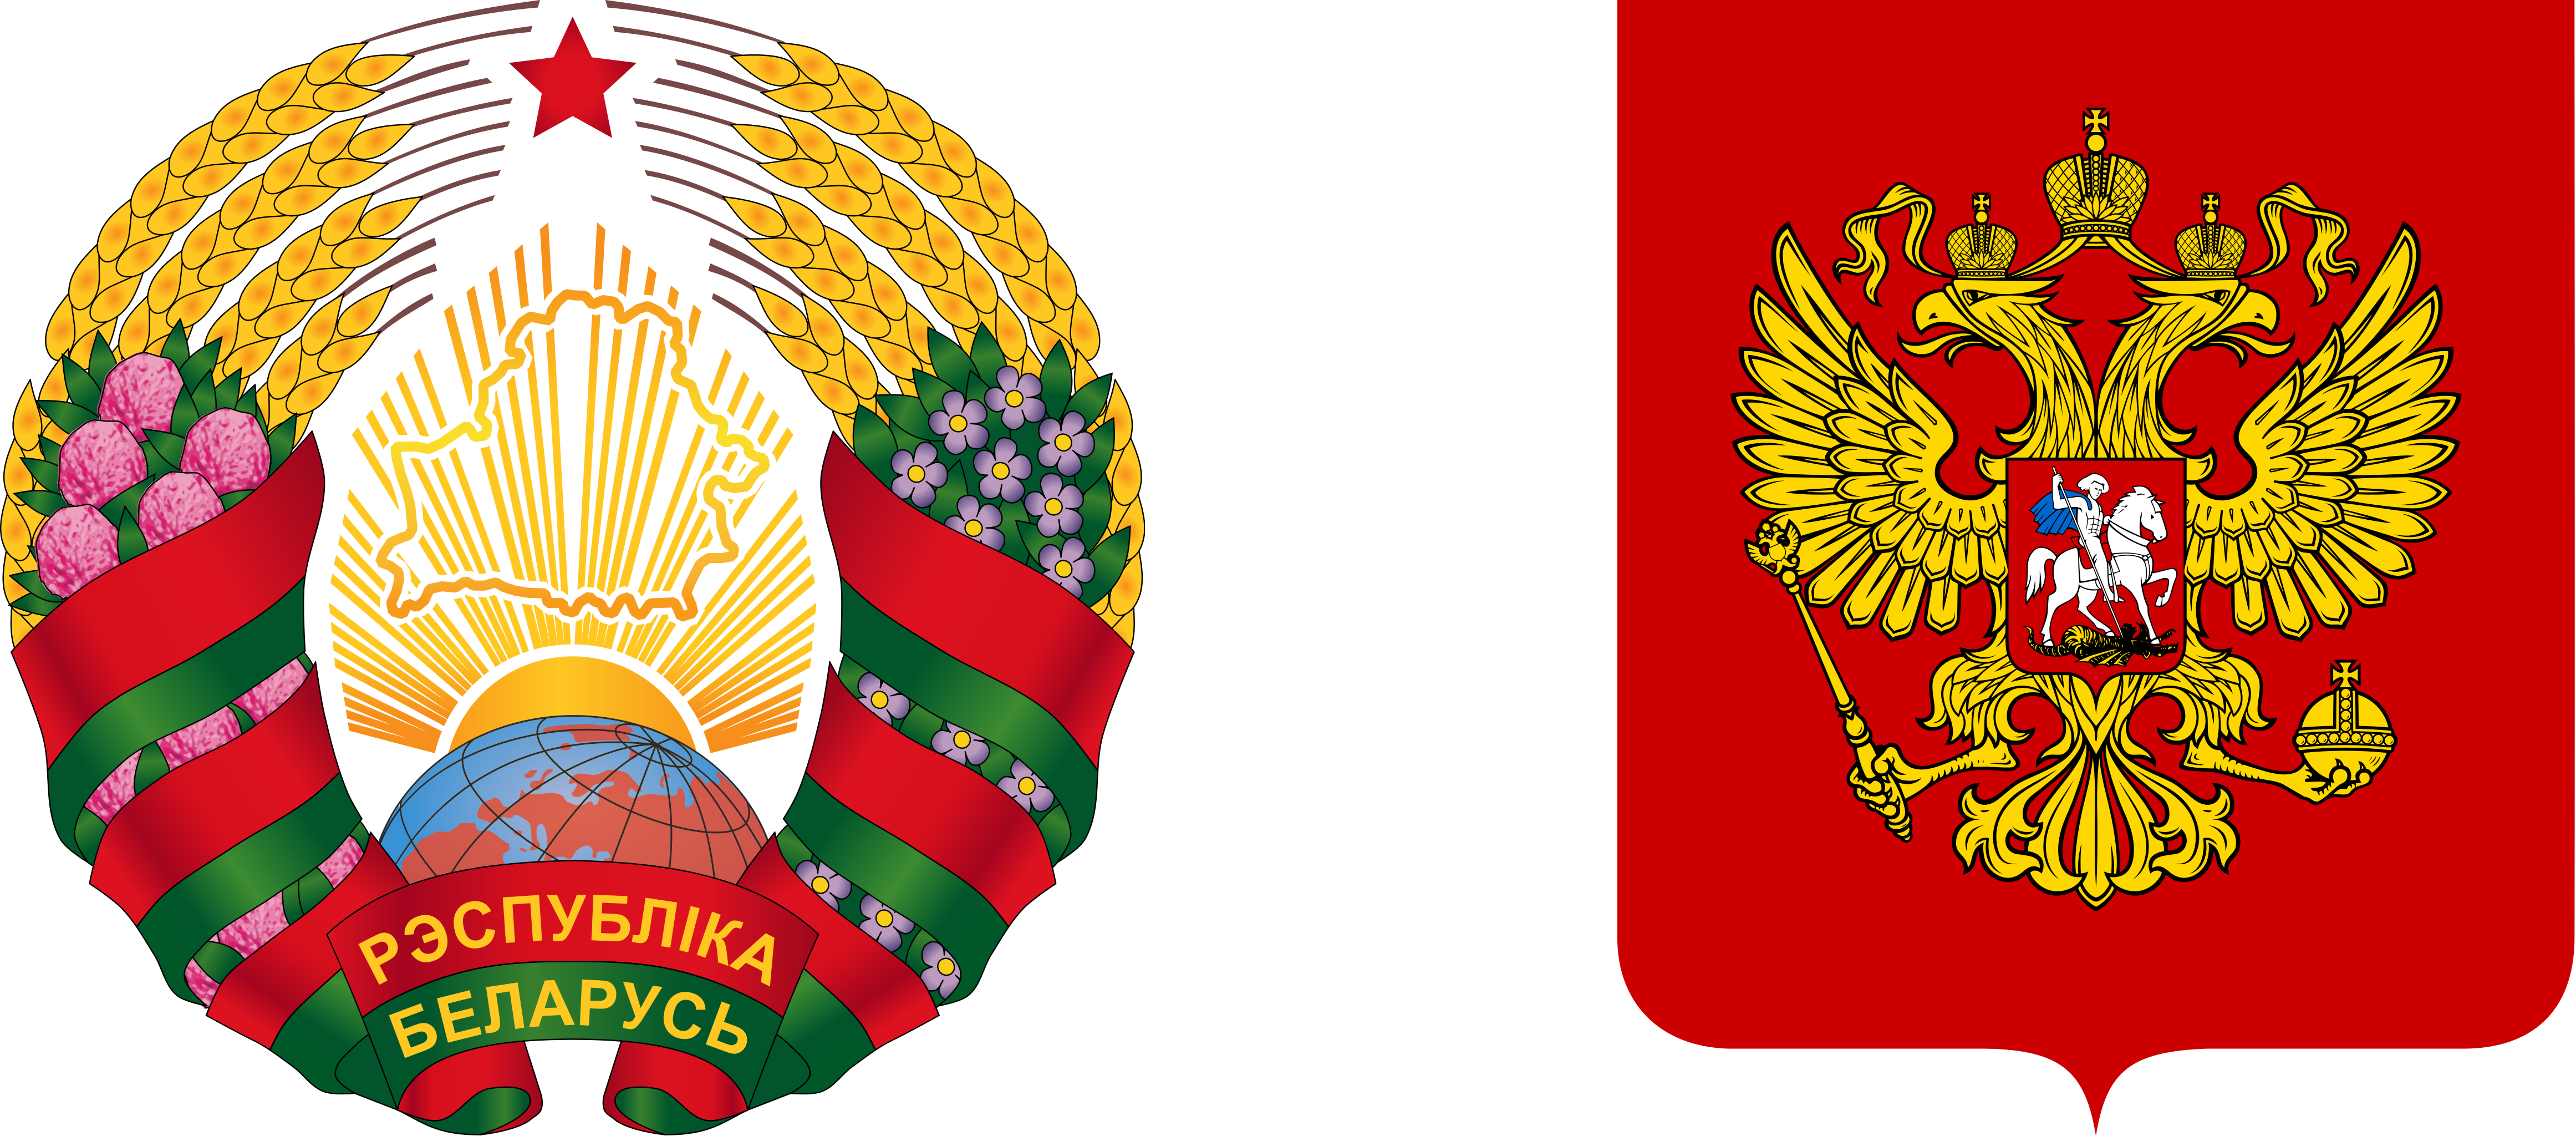 Union State of Belarus and Russia